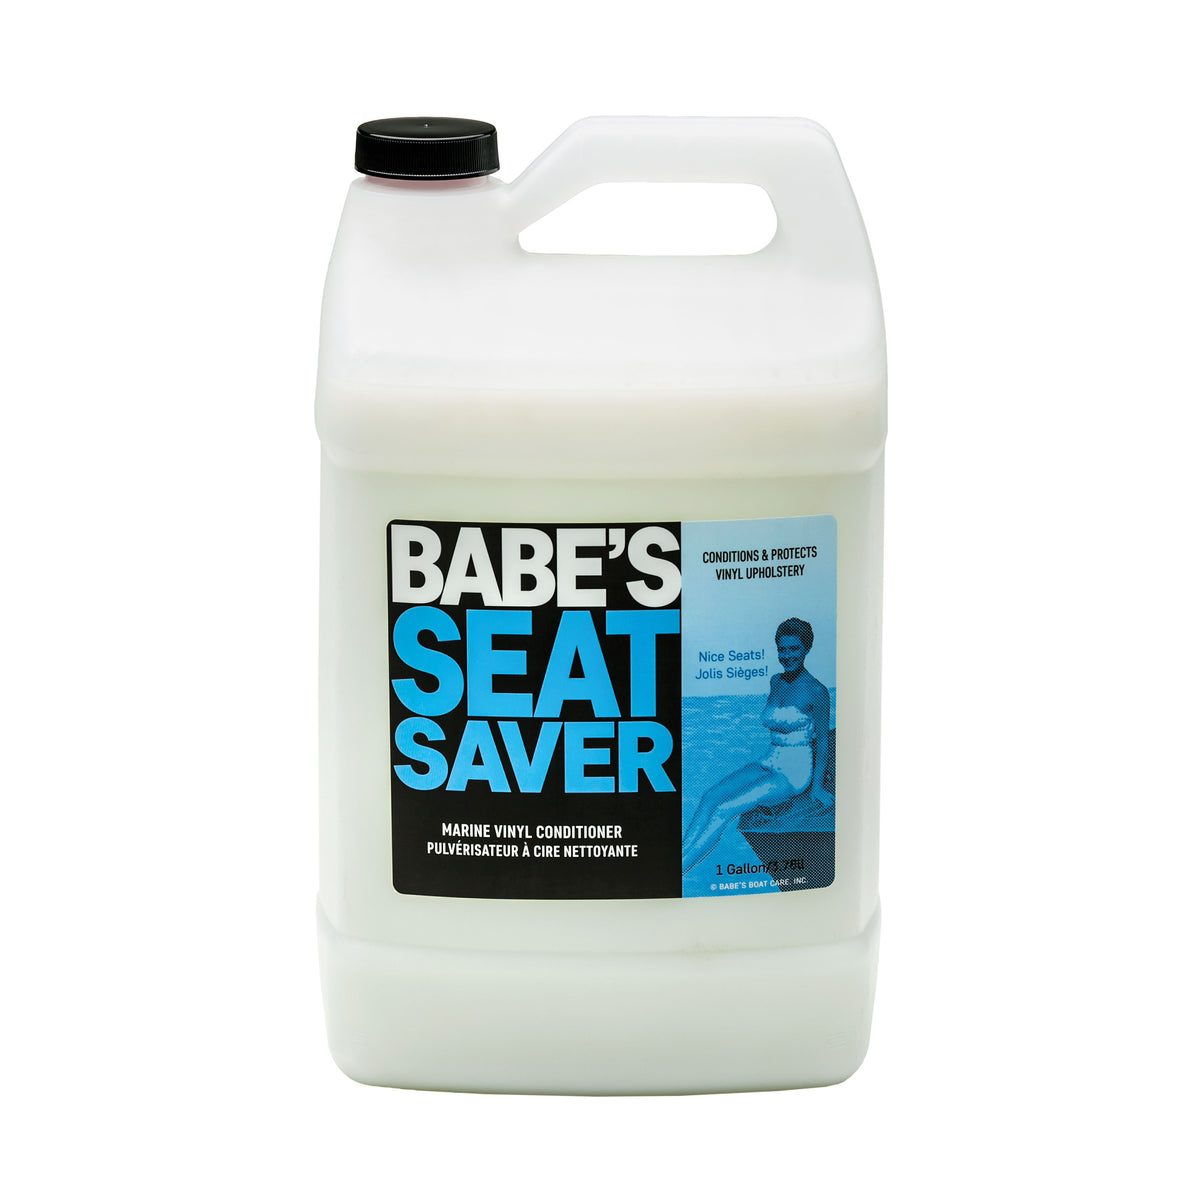 BABE'S Boat Care Products BB8201 Seat Saver - 1 Gallon